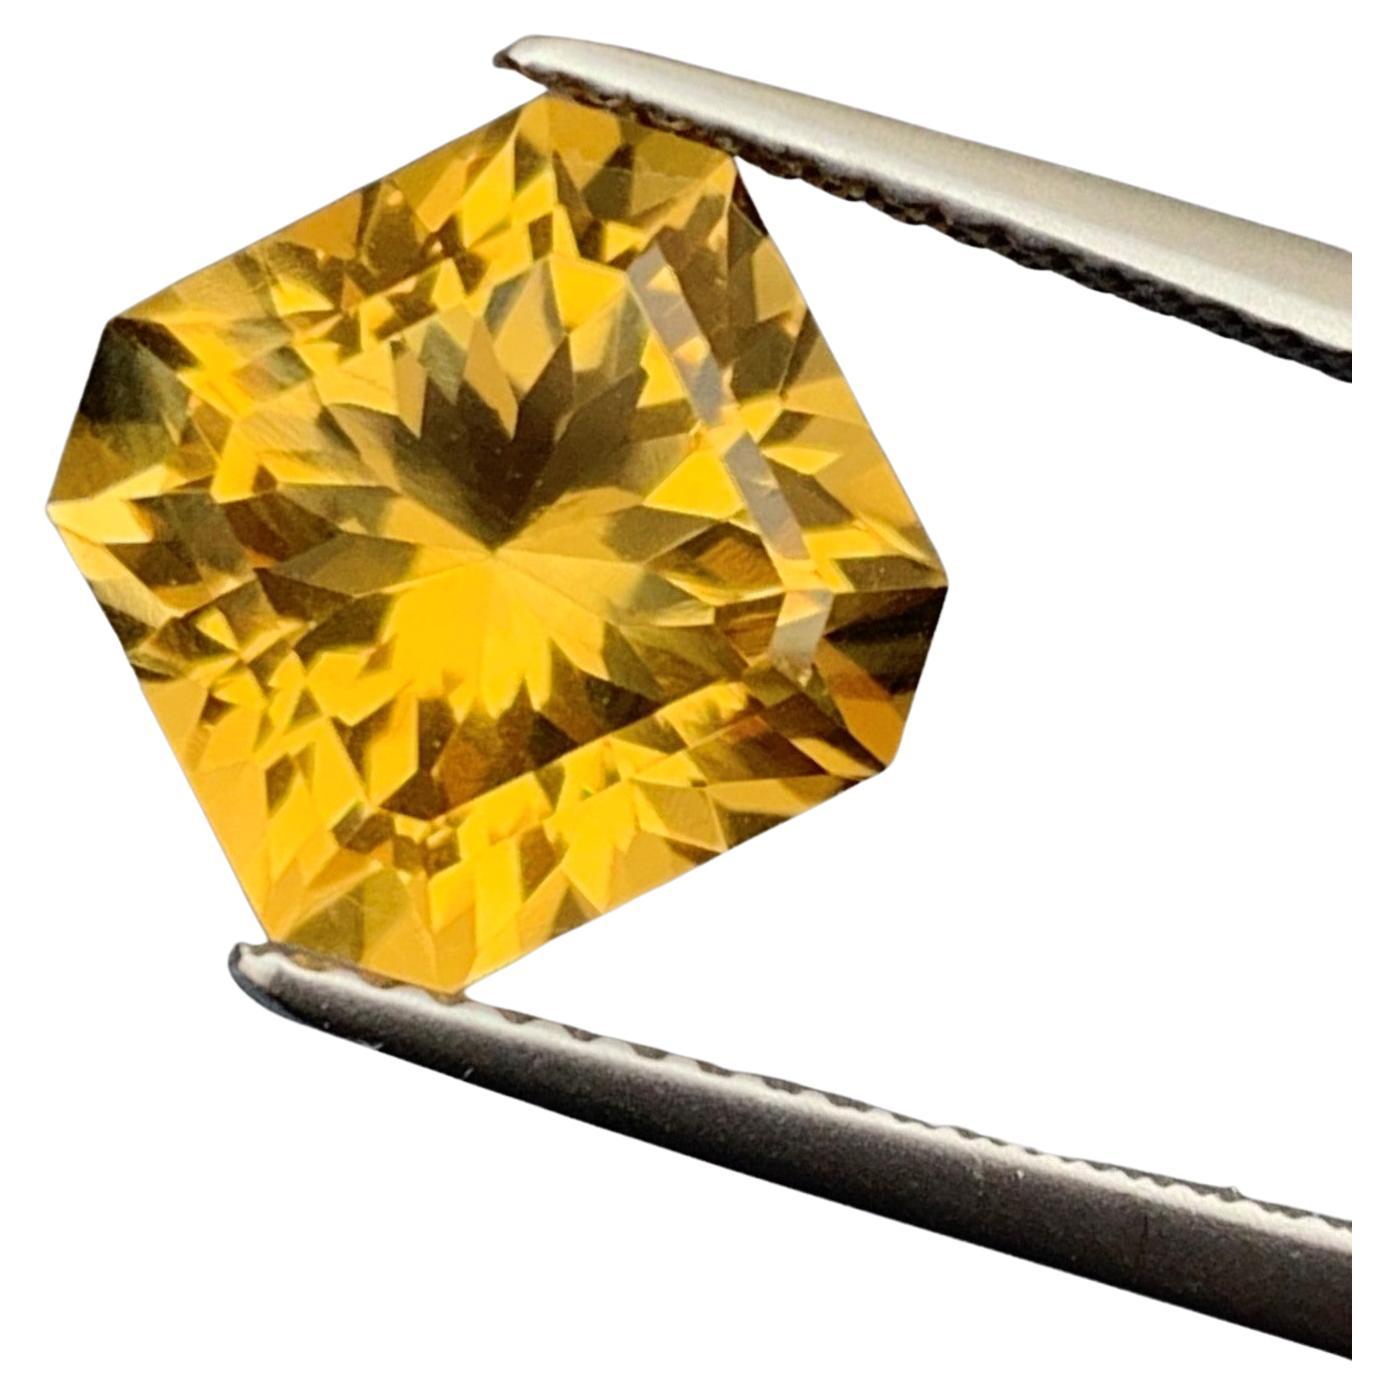 Gorgeous Flower Cut Faceted Yellow Citrine 3.80 Carat From Brazil